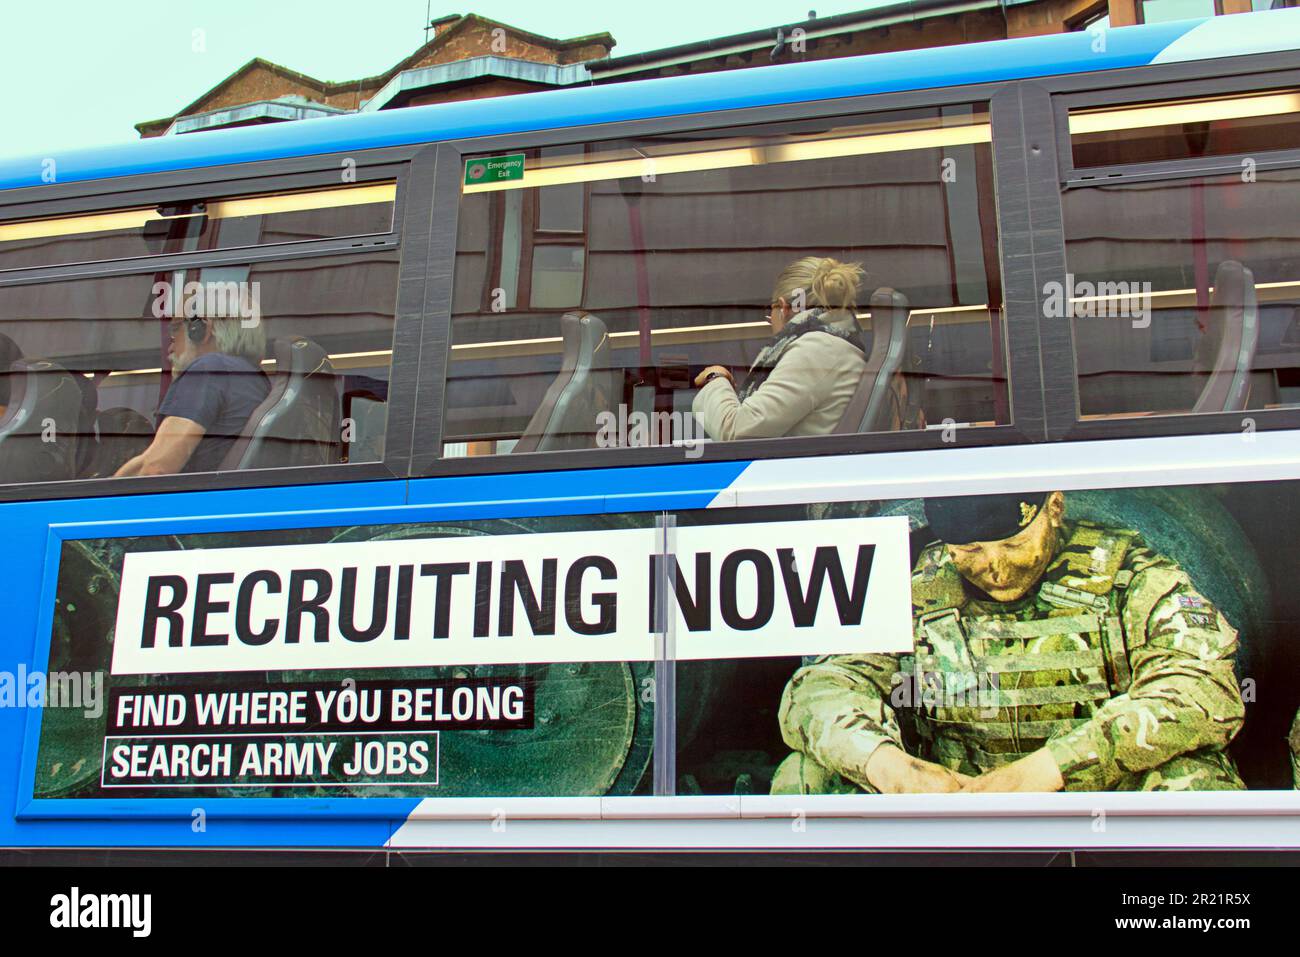 army recruitment poster on the side of a bus Stock Photo